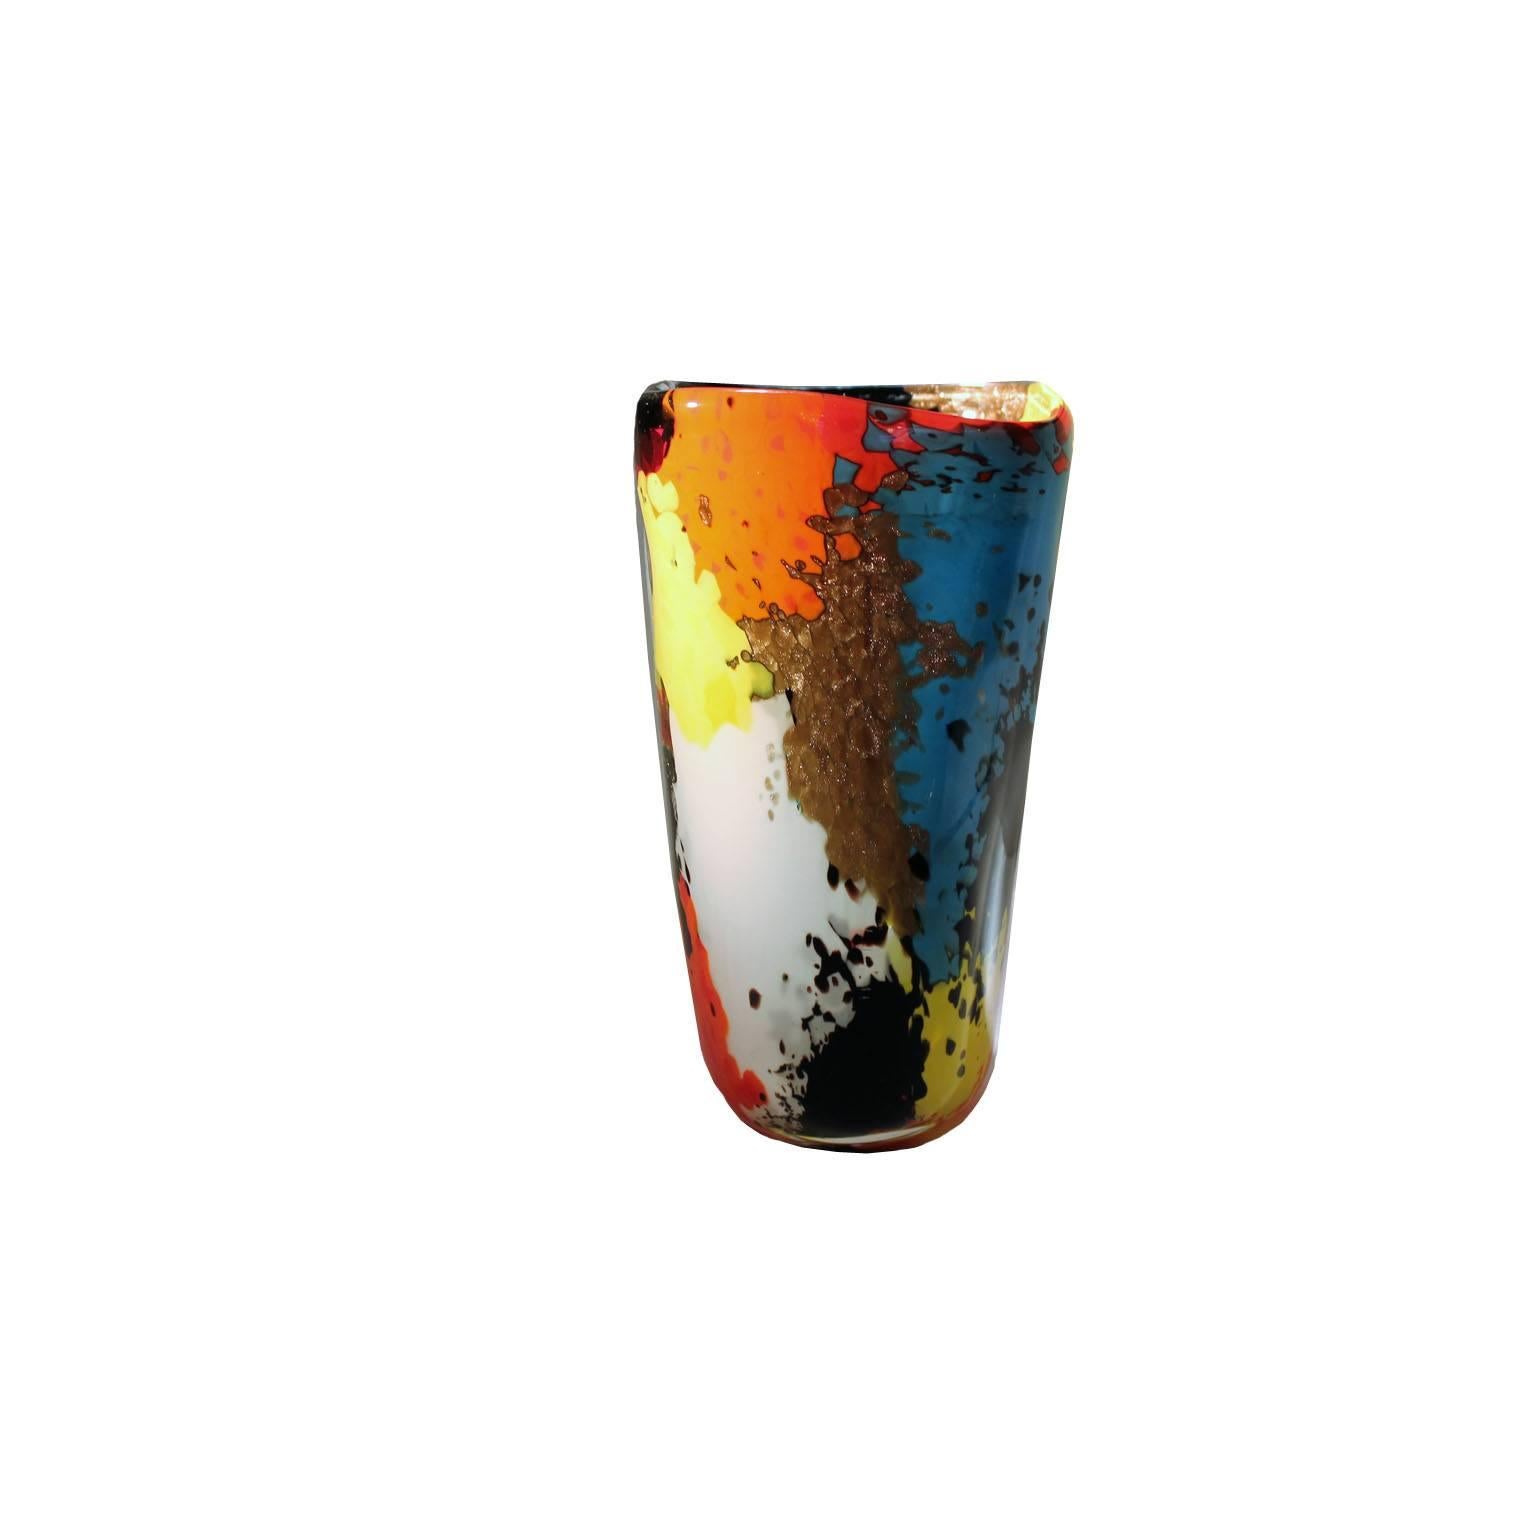 Designer Dino Martens. Oriente vase.
Made by Aureliano Toso, manufacturer.
Clear cased glass with powder inclusions in red, black, white, yellow, orange blue and aventurine; star-shaped murrine and translucent plates of different colors as well as